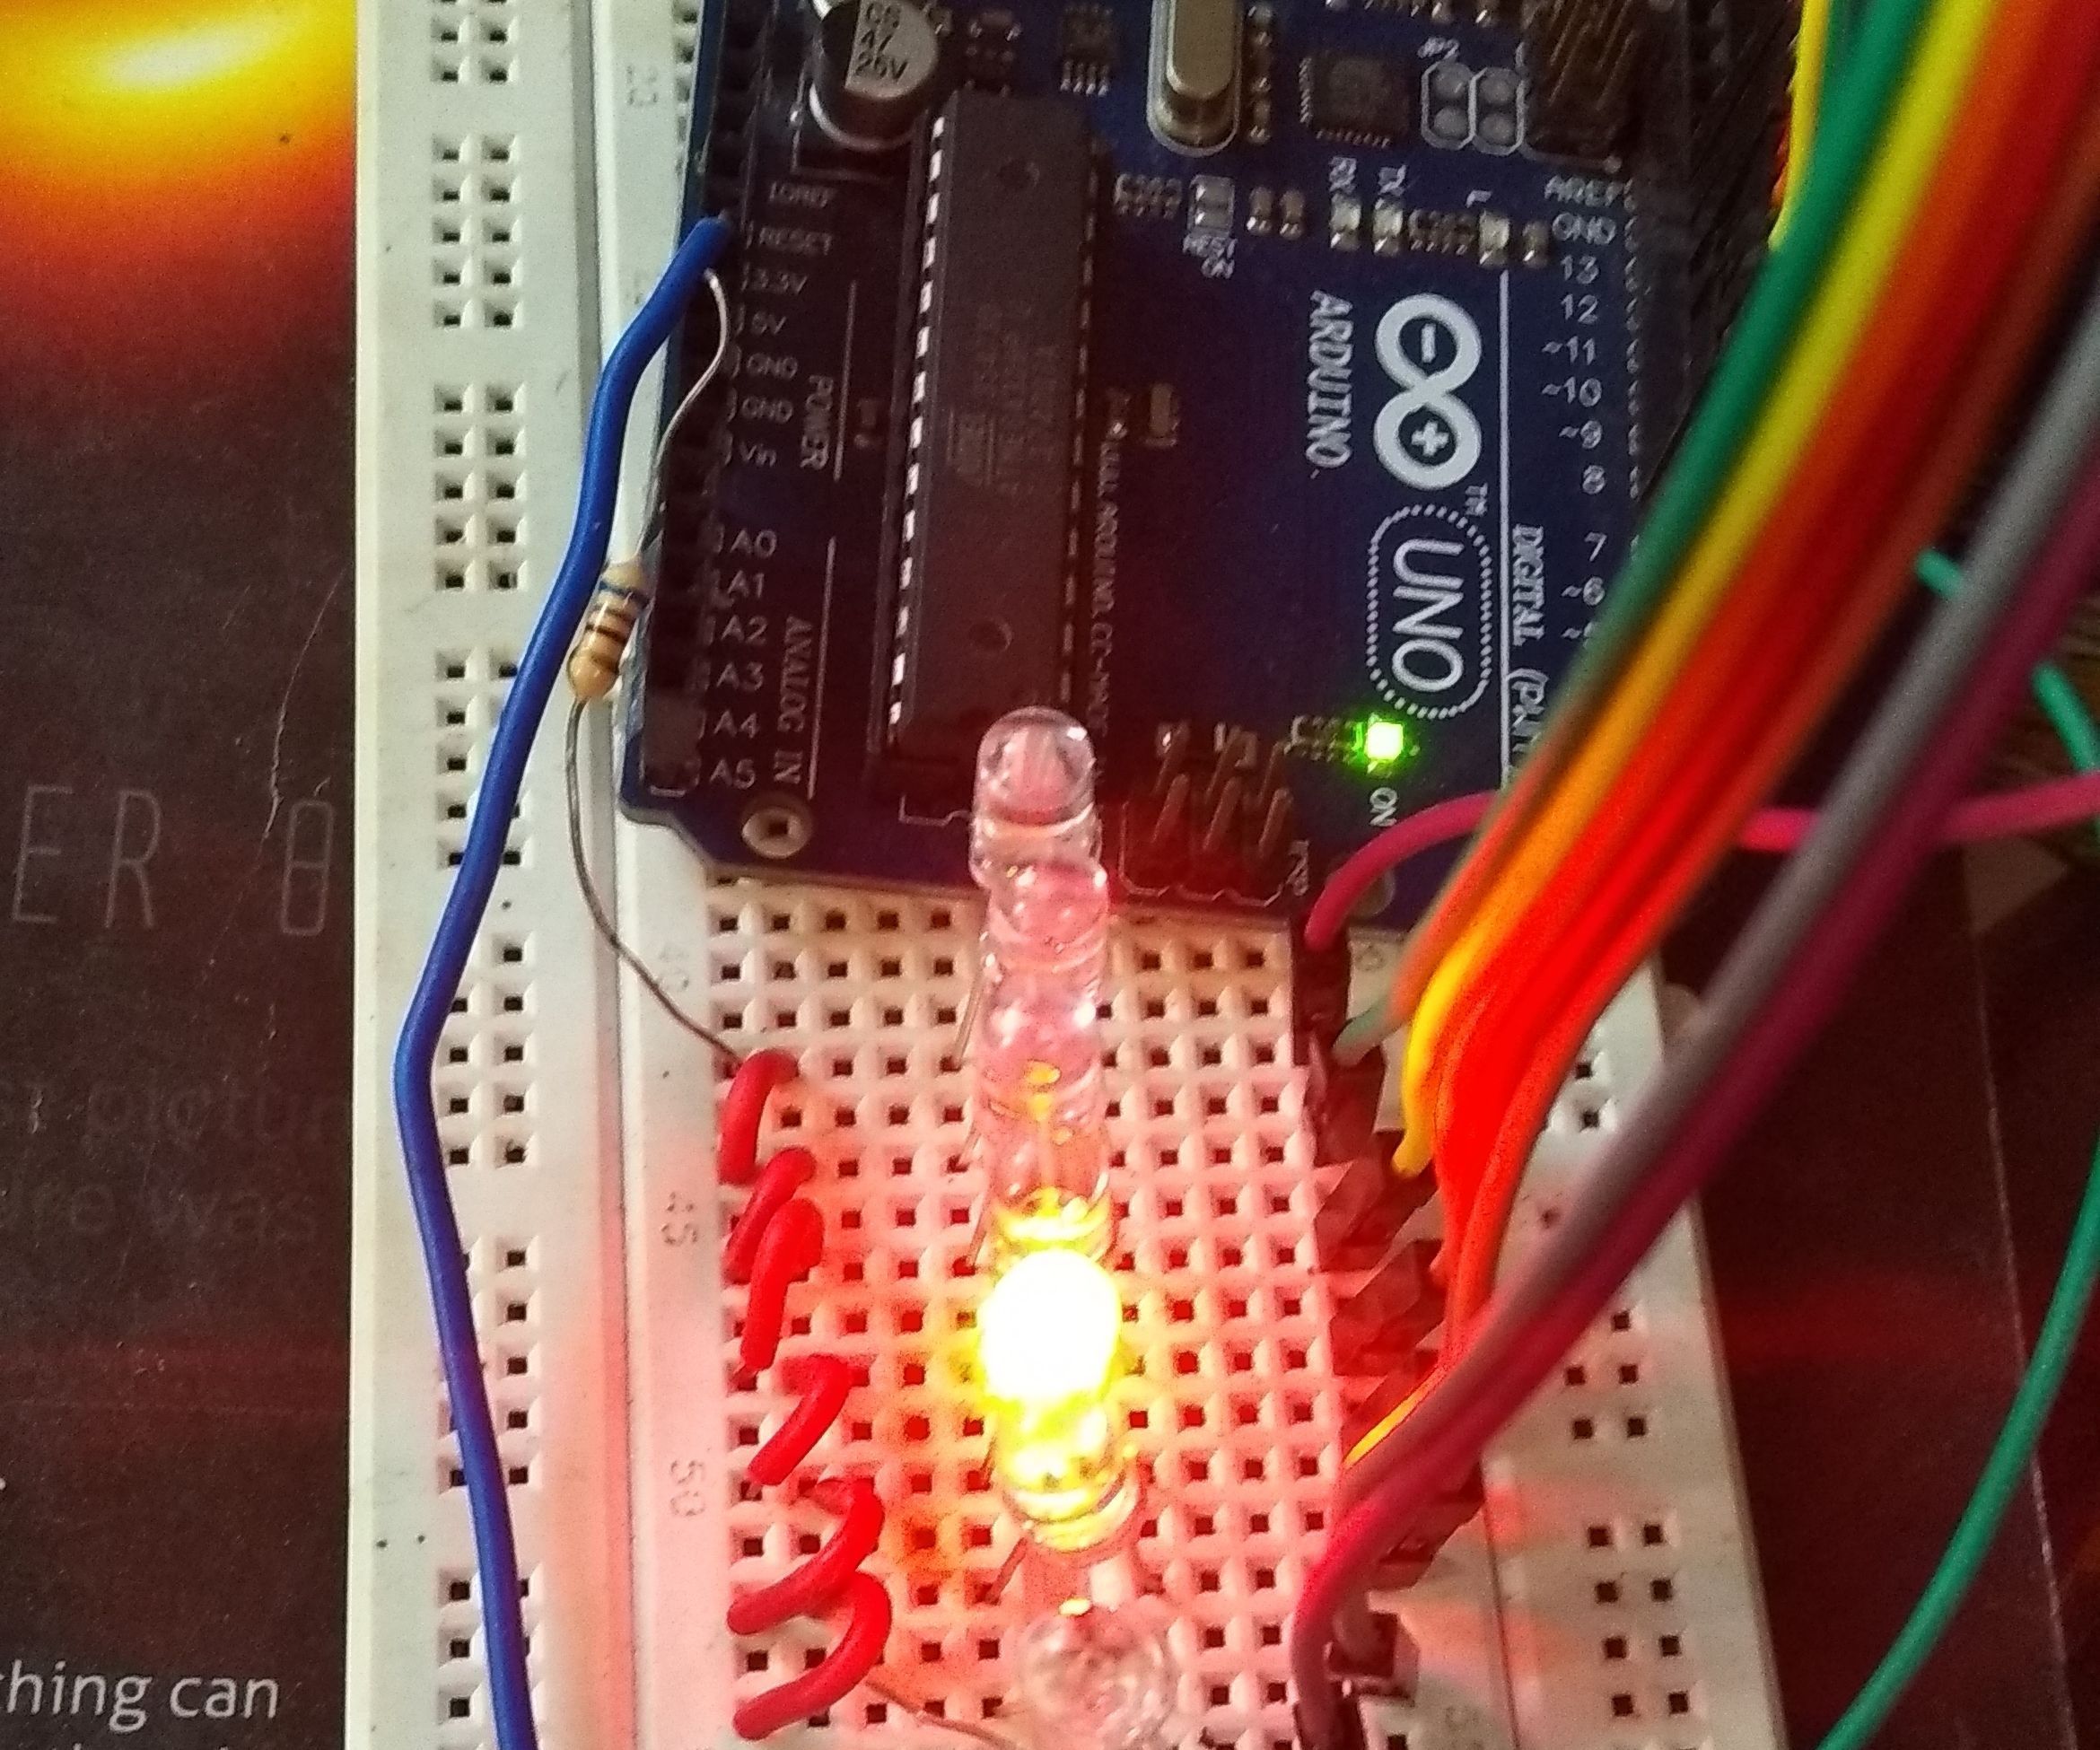 Led Series With Arduino and Pic16f877a Microcontroller